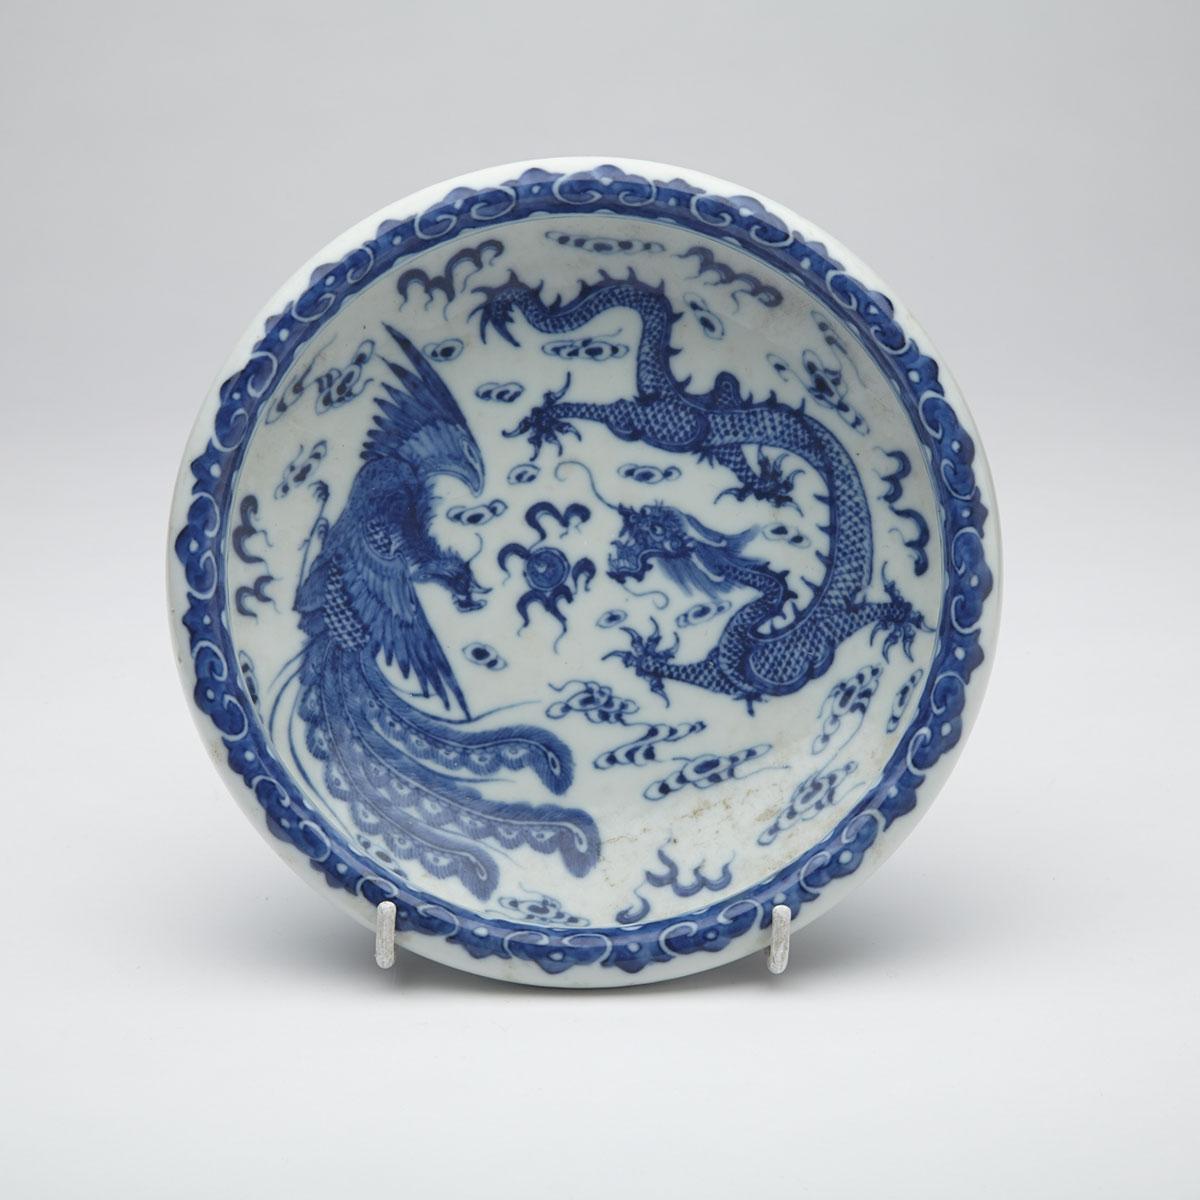 Blue and White ‘Dragon and Phoenix’ Bowl, Qianlong Mark 